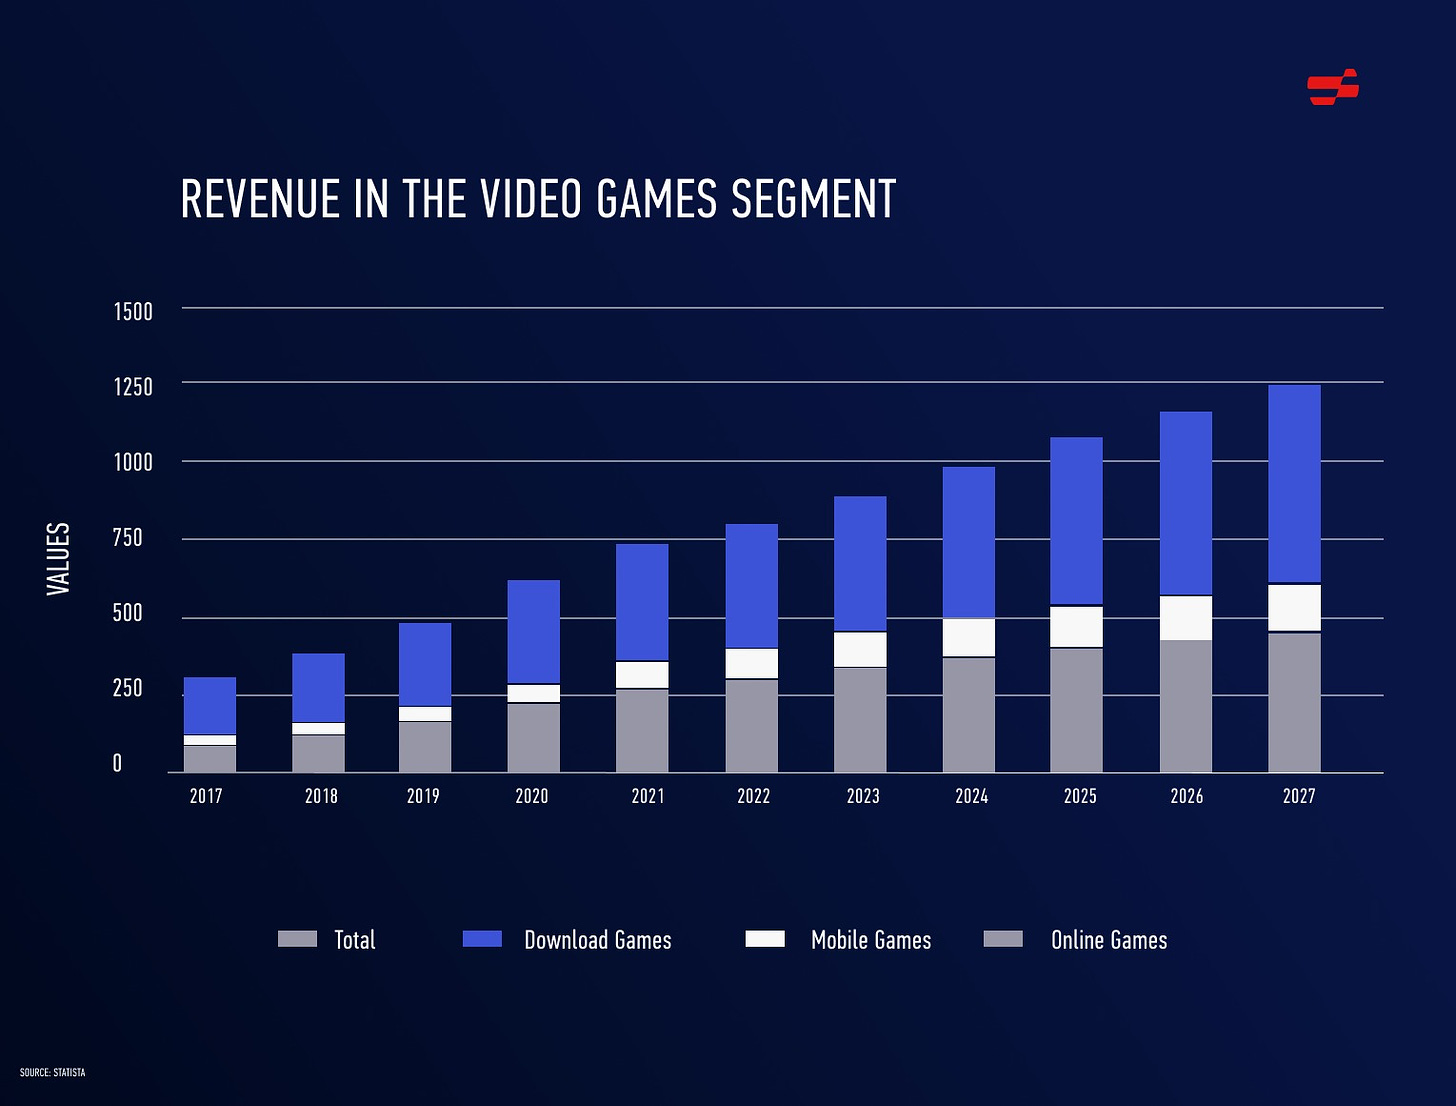 Metaverse mobile games to grow to over USD 3.1 billion in 2022 - Gaming And  Media